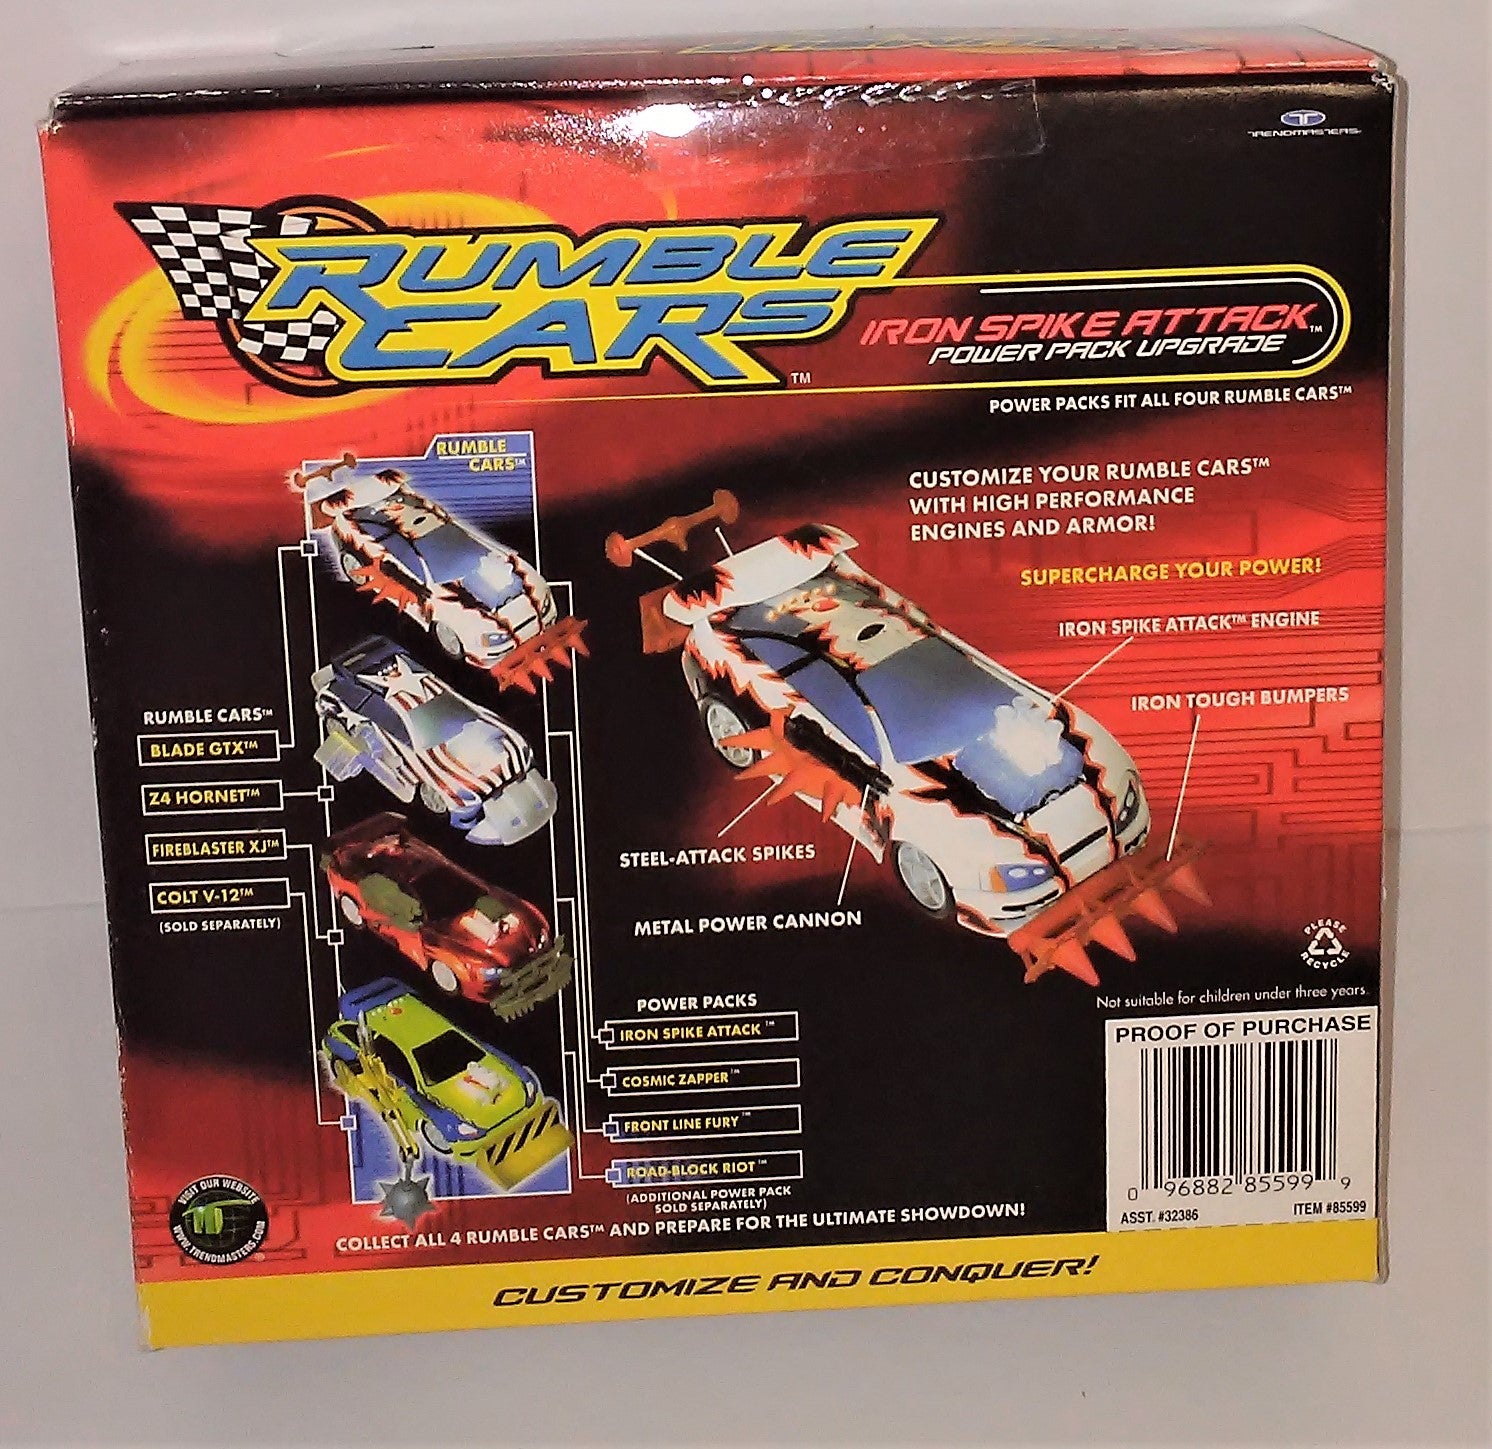 Rumble Cars IRON SPIKE ATTACK Power Pack Upgrade Set from 2001